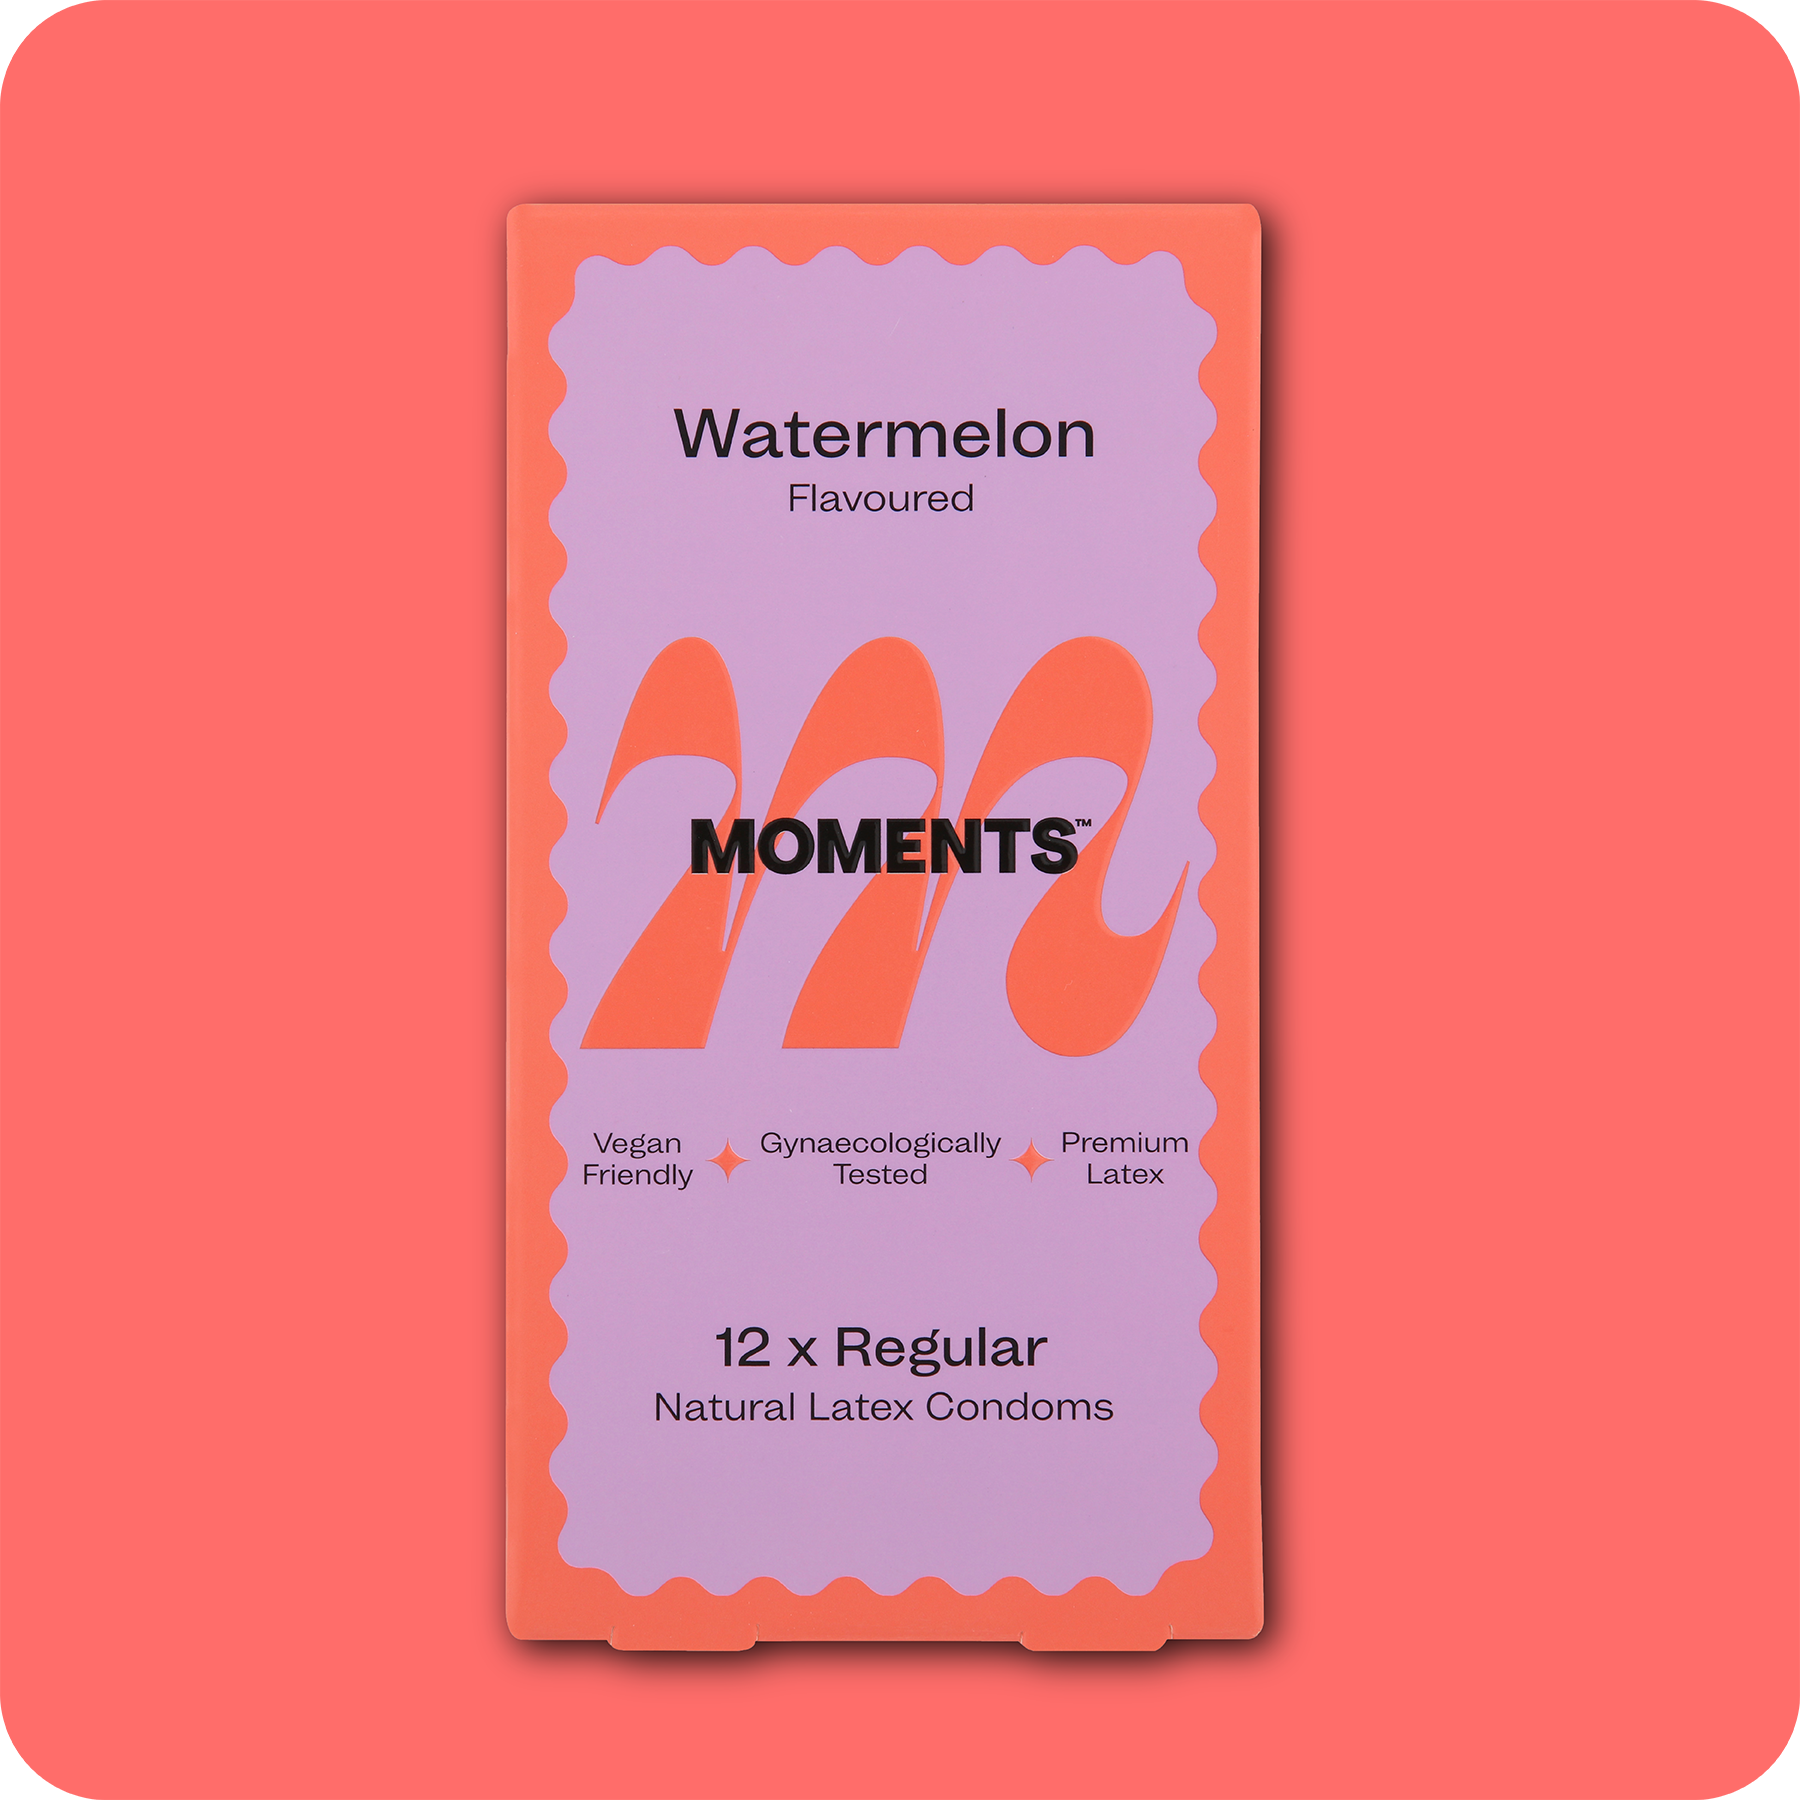 Moments Watermelon flavoured condom displayed on a pink surface